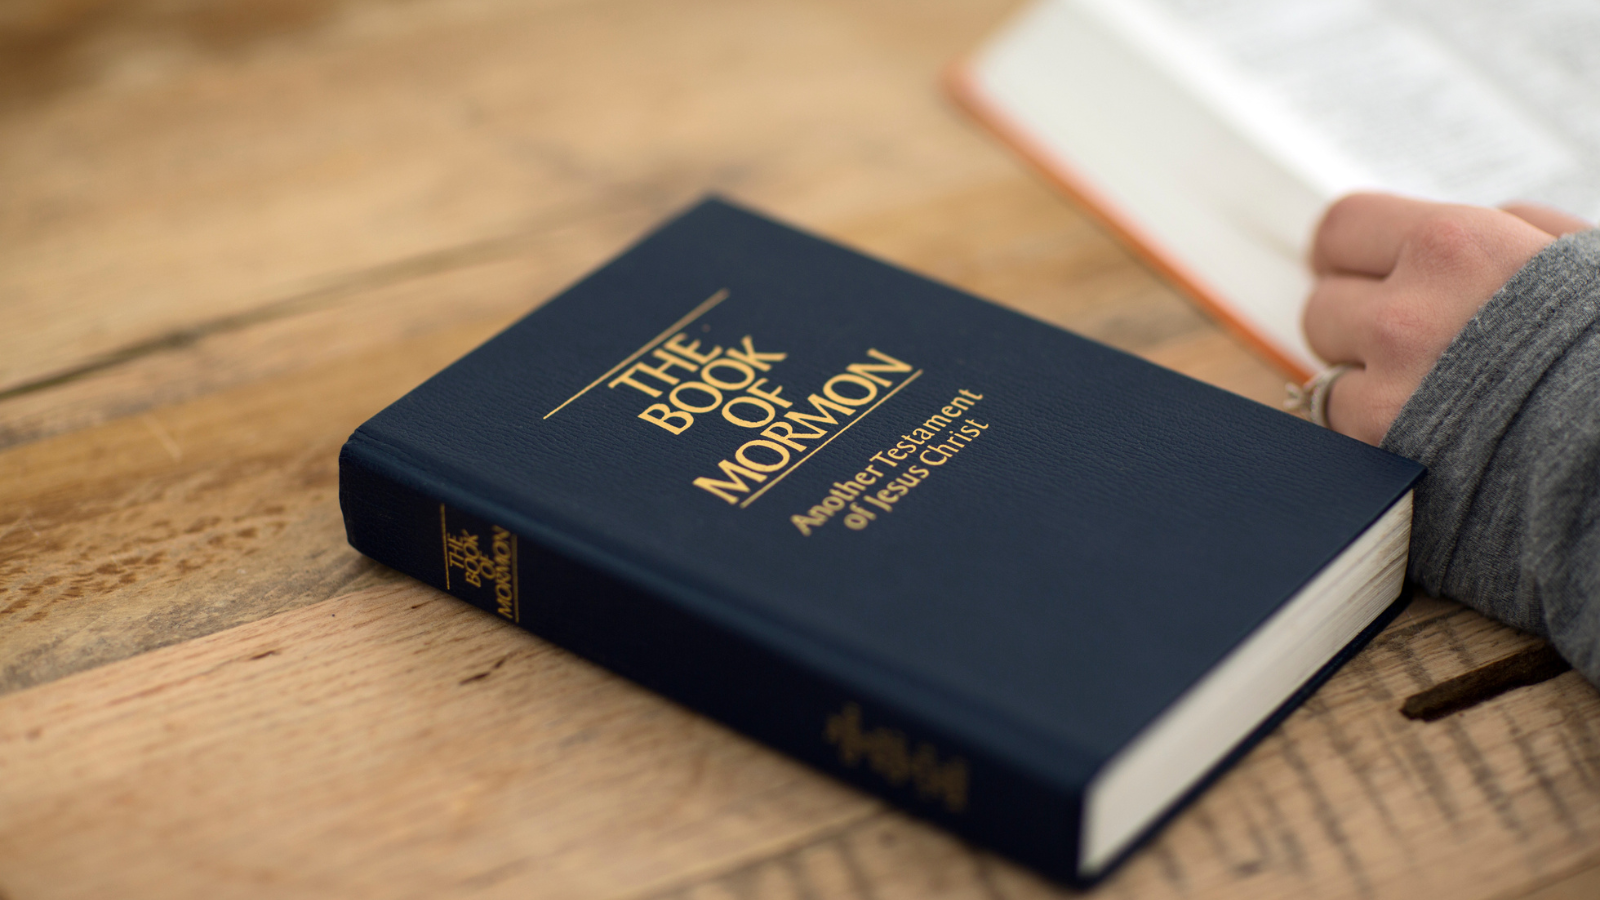 The Book of Mormon on a table.